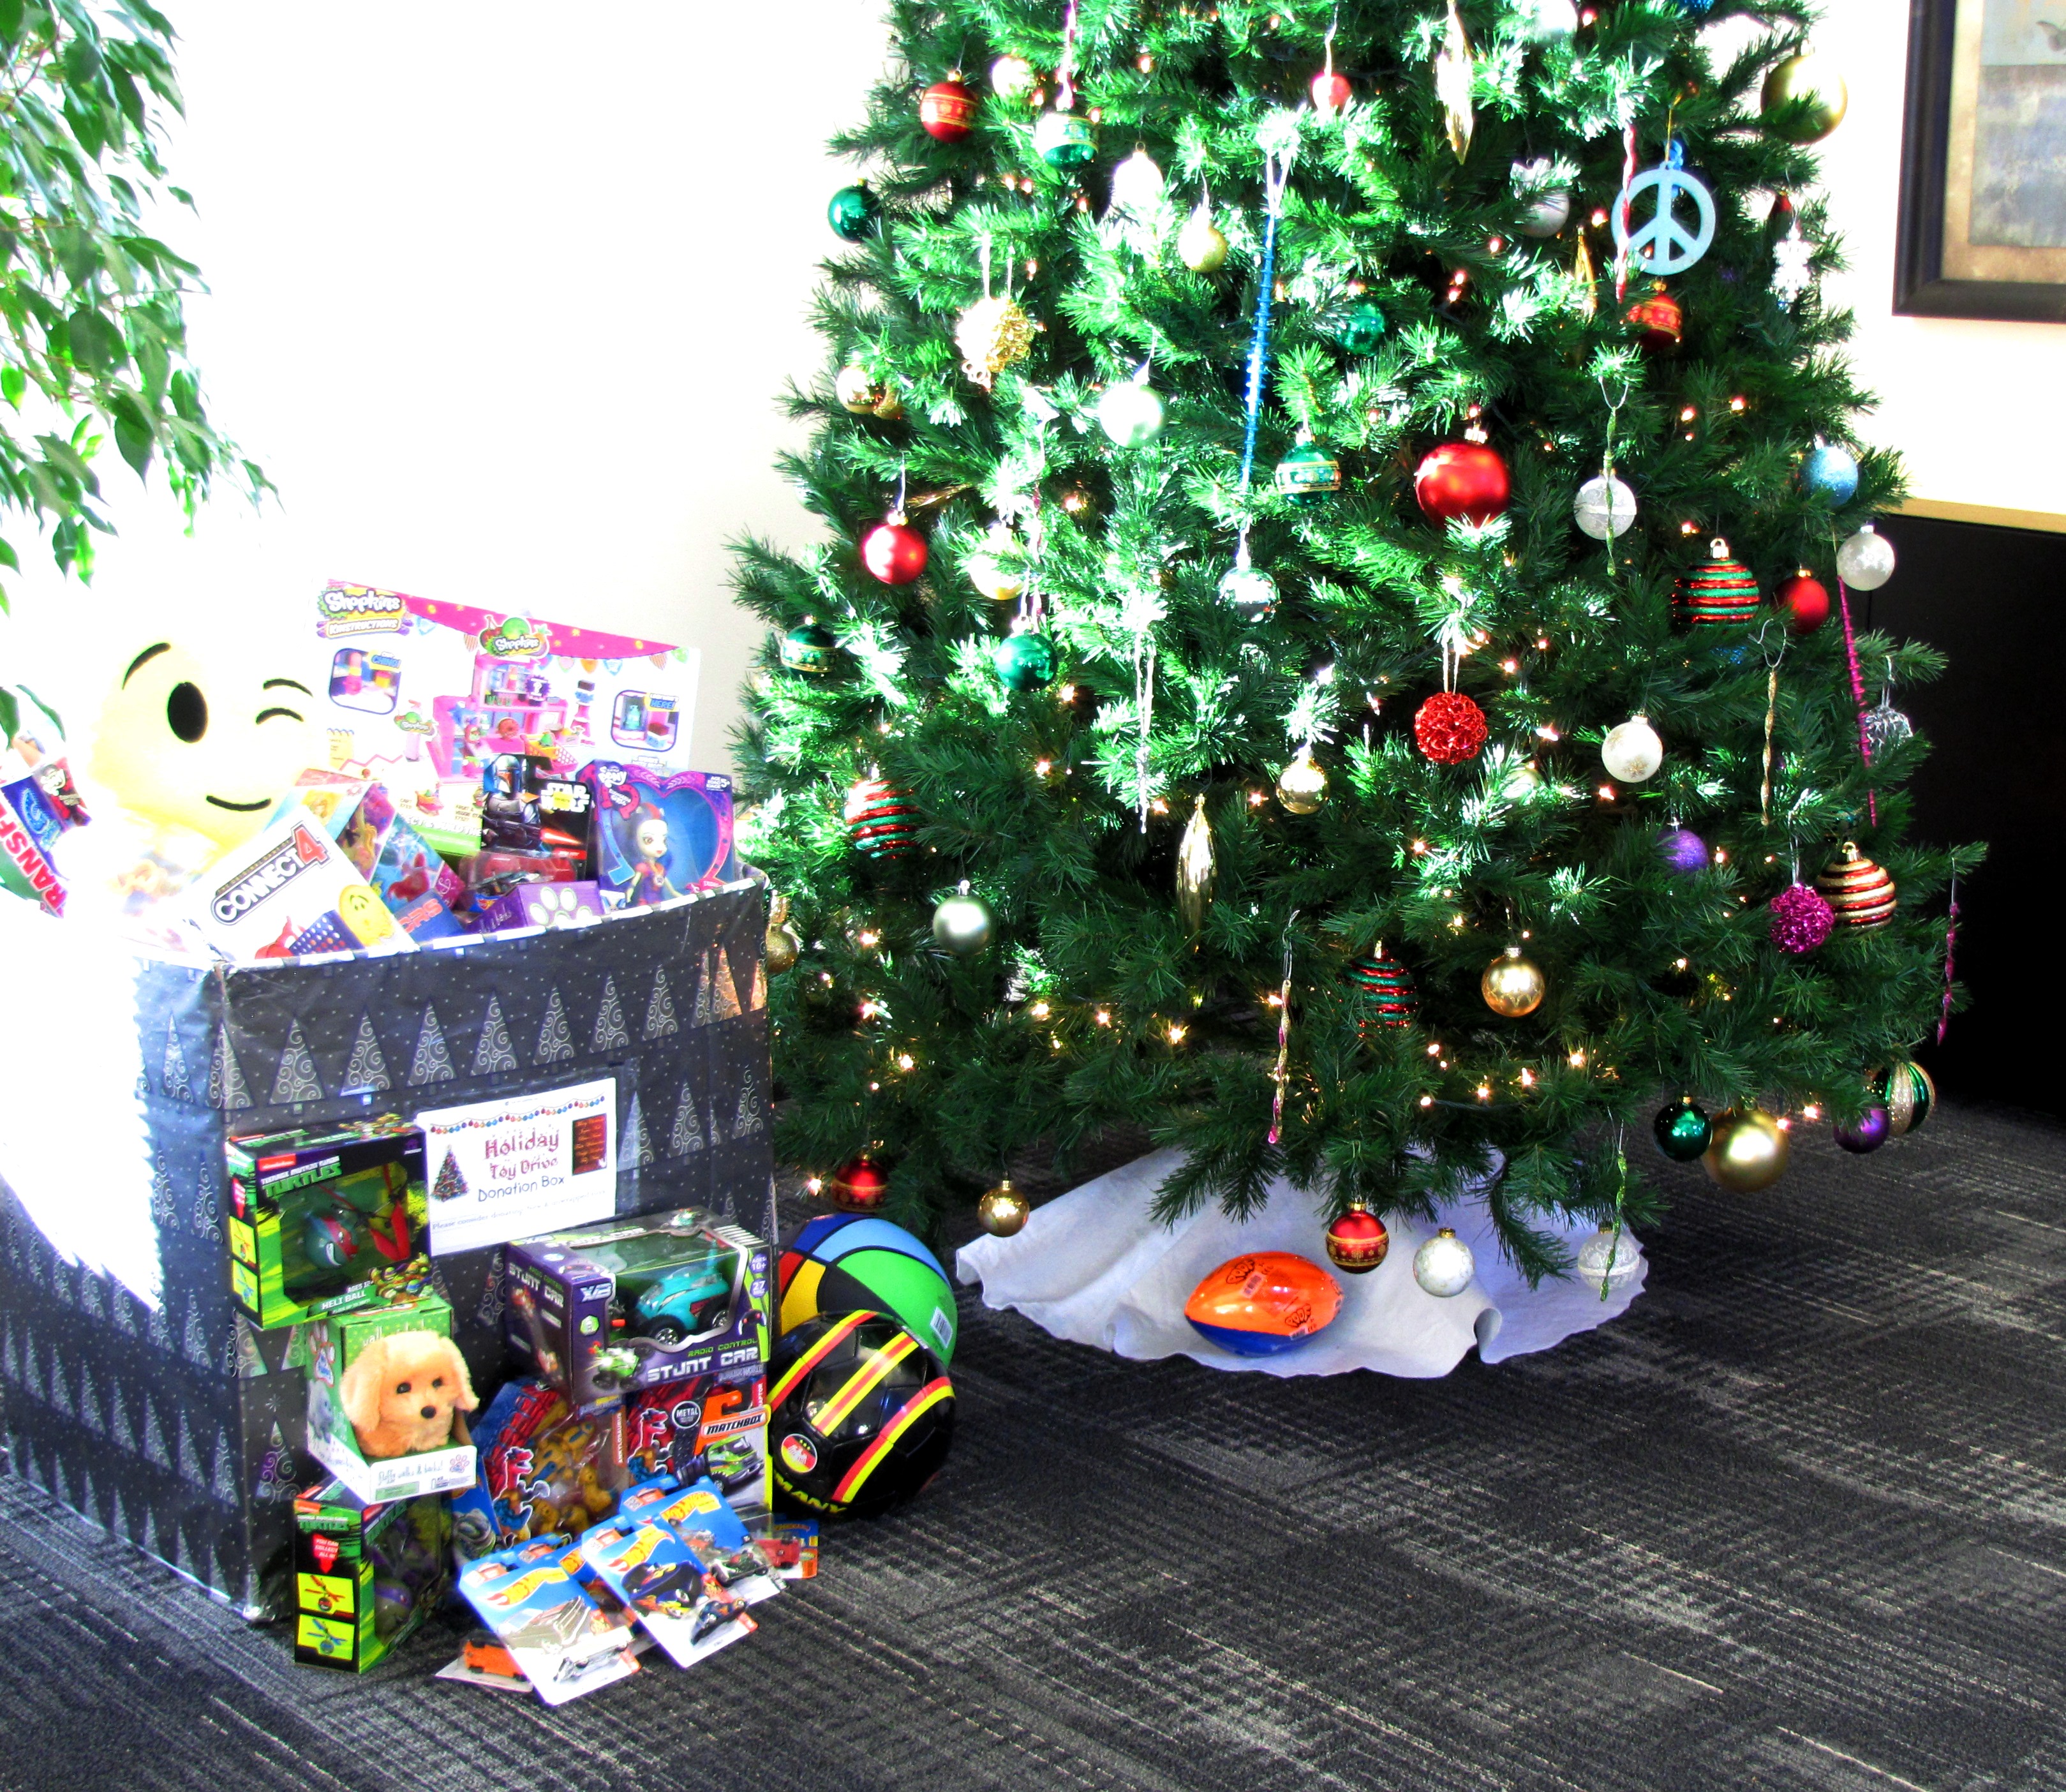 Adjusters International Toys for Tots